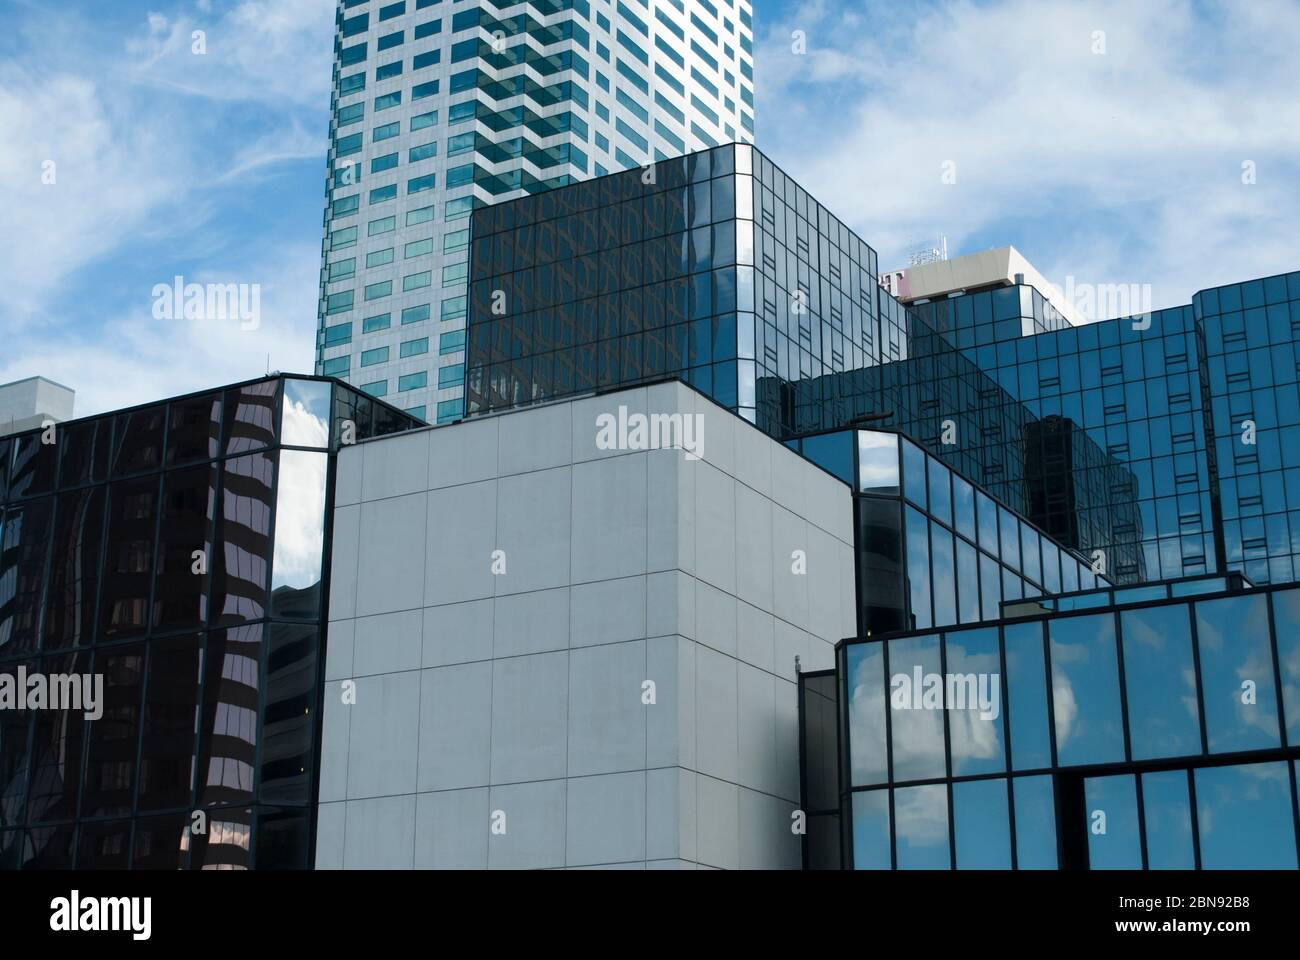 Cubic shape of the modern business buildings made from glass with reflections of blue sky with white clouds. Stock Photo